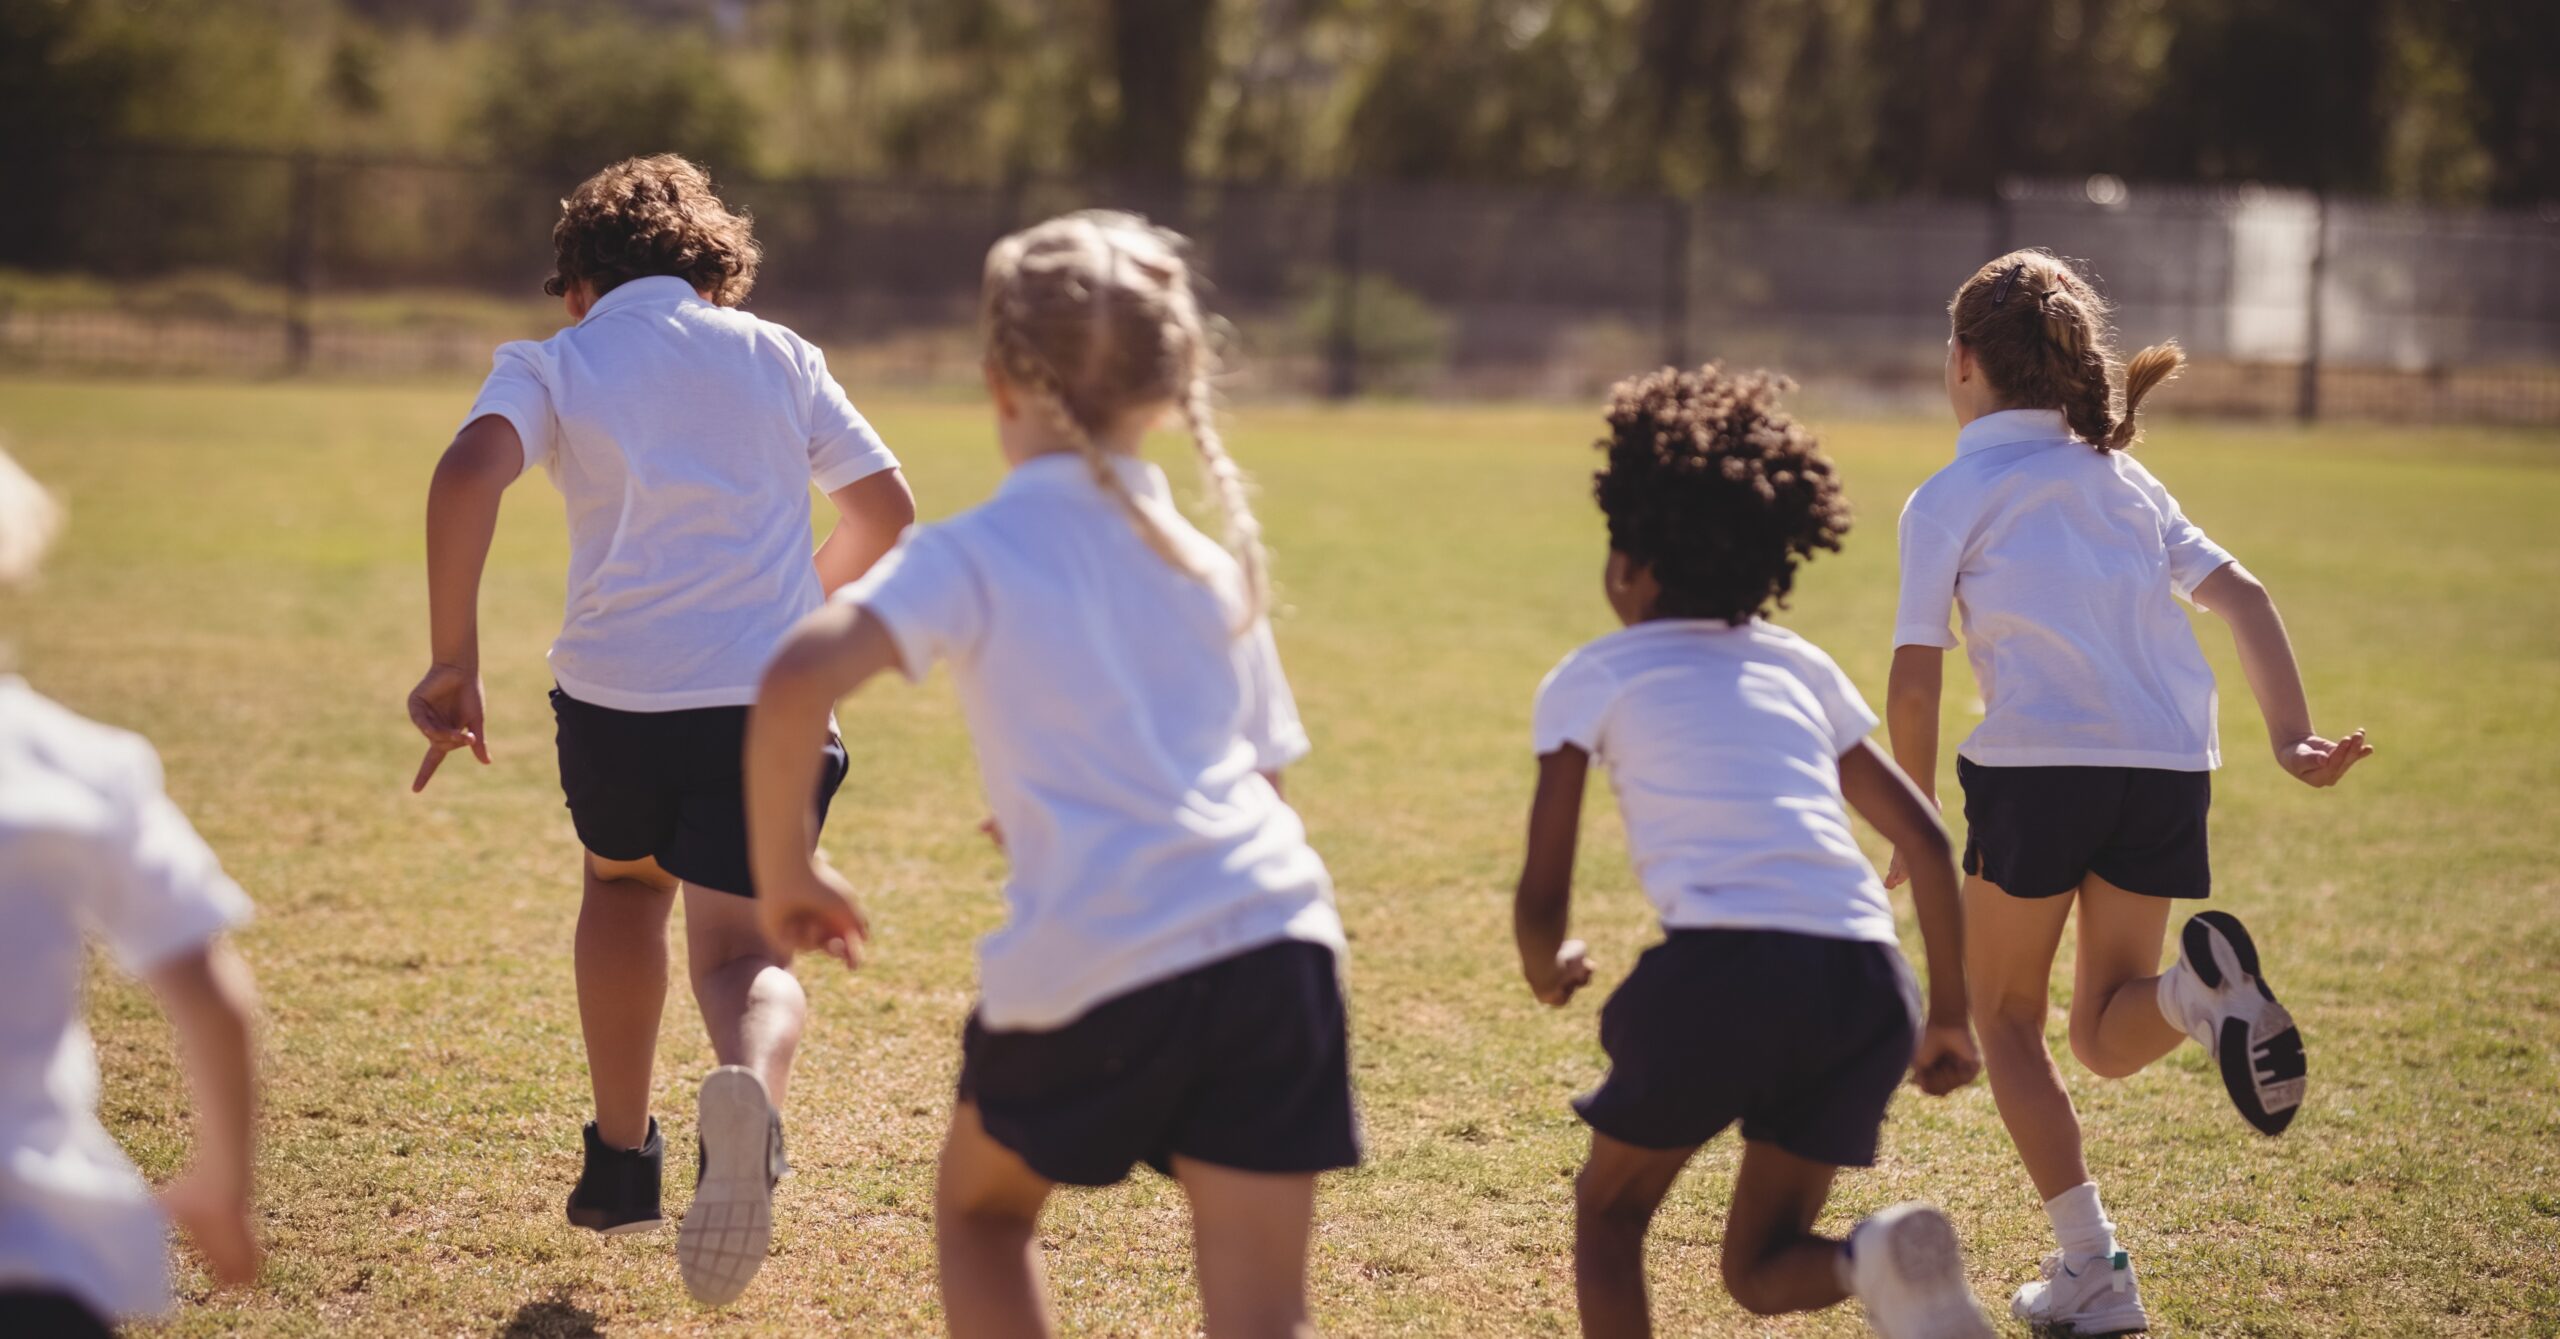 Young children in primary school running on a field to exercise.